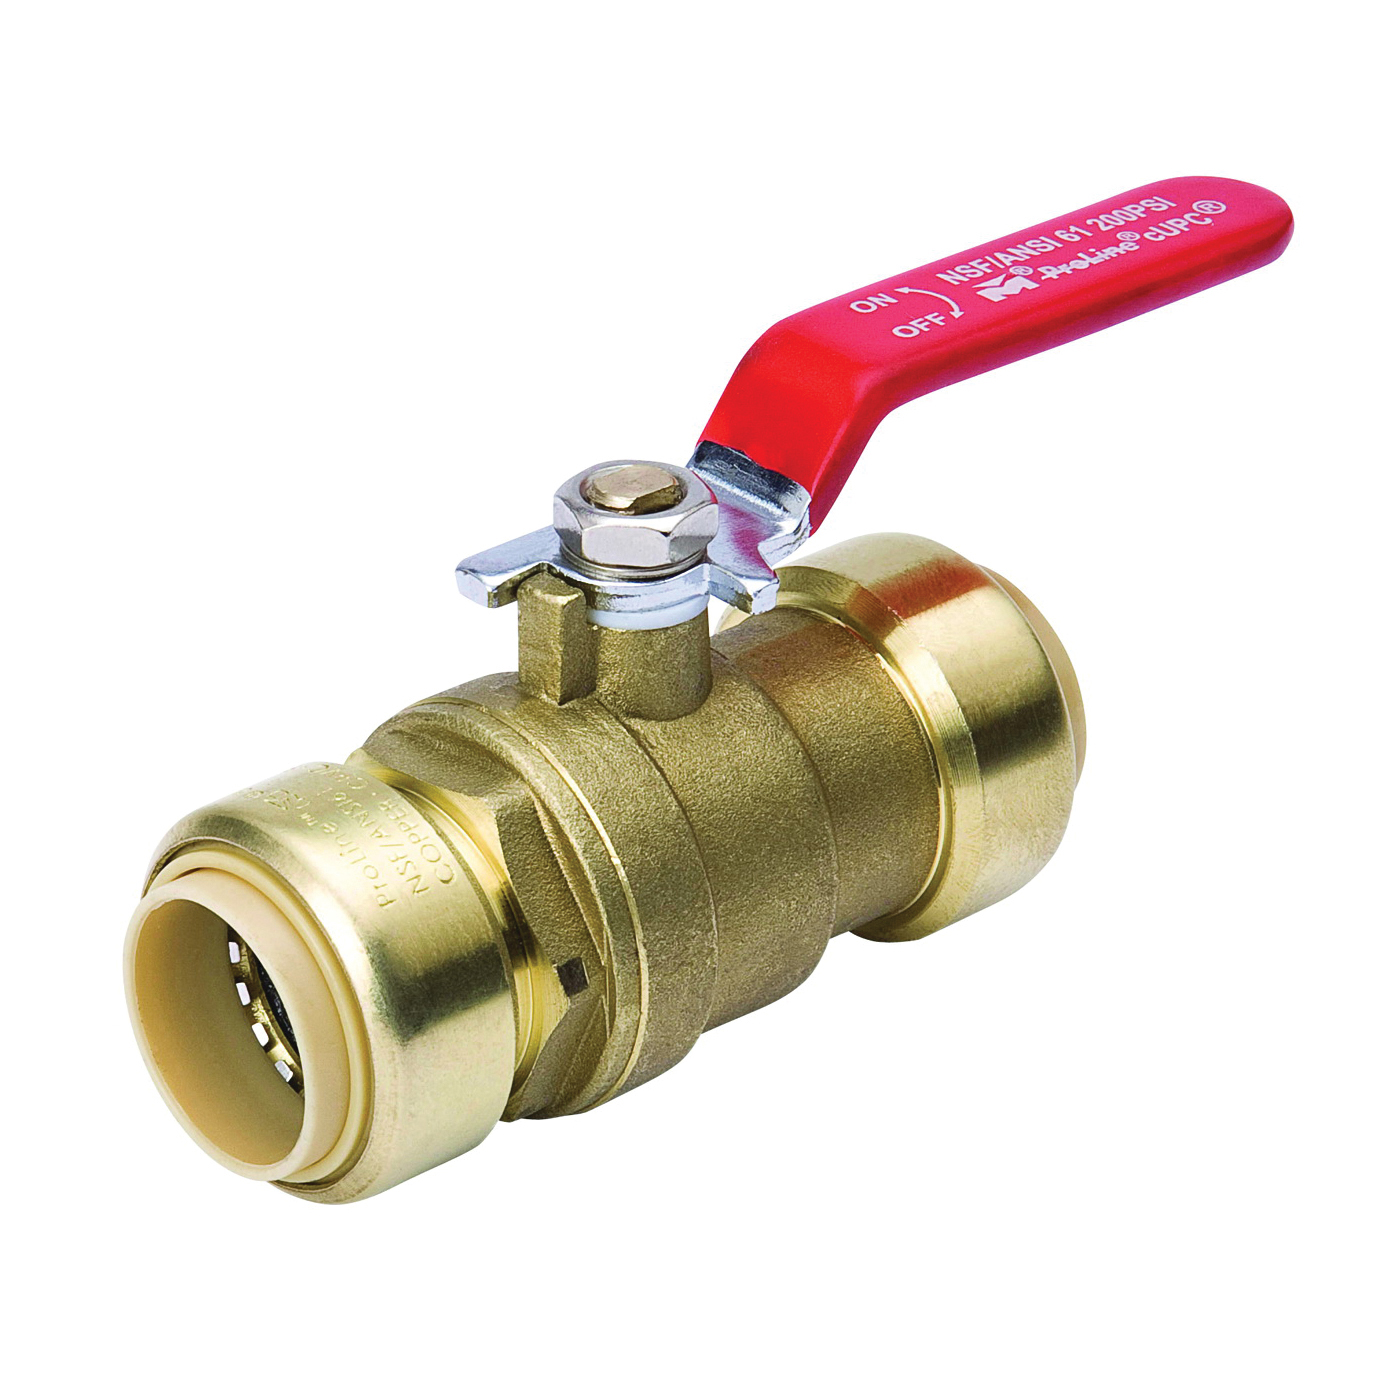 107-064HC Ball Valve, 3/4 in Connection, Push-Fit, 200 psi Pressure, Manual Actuator, Brass Body